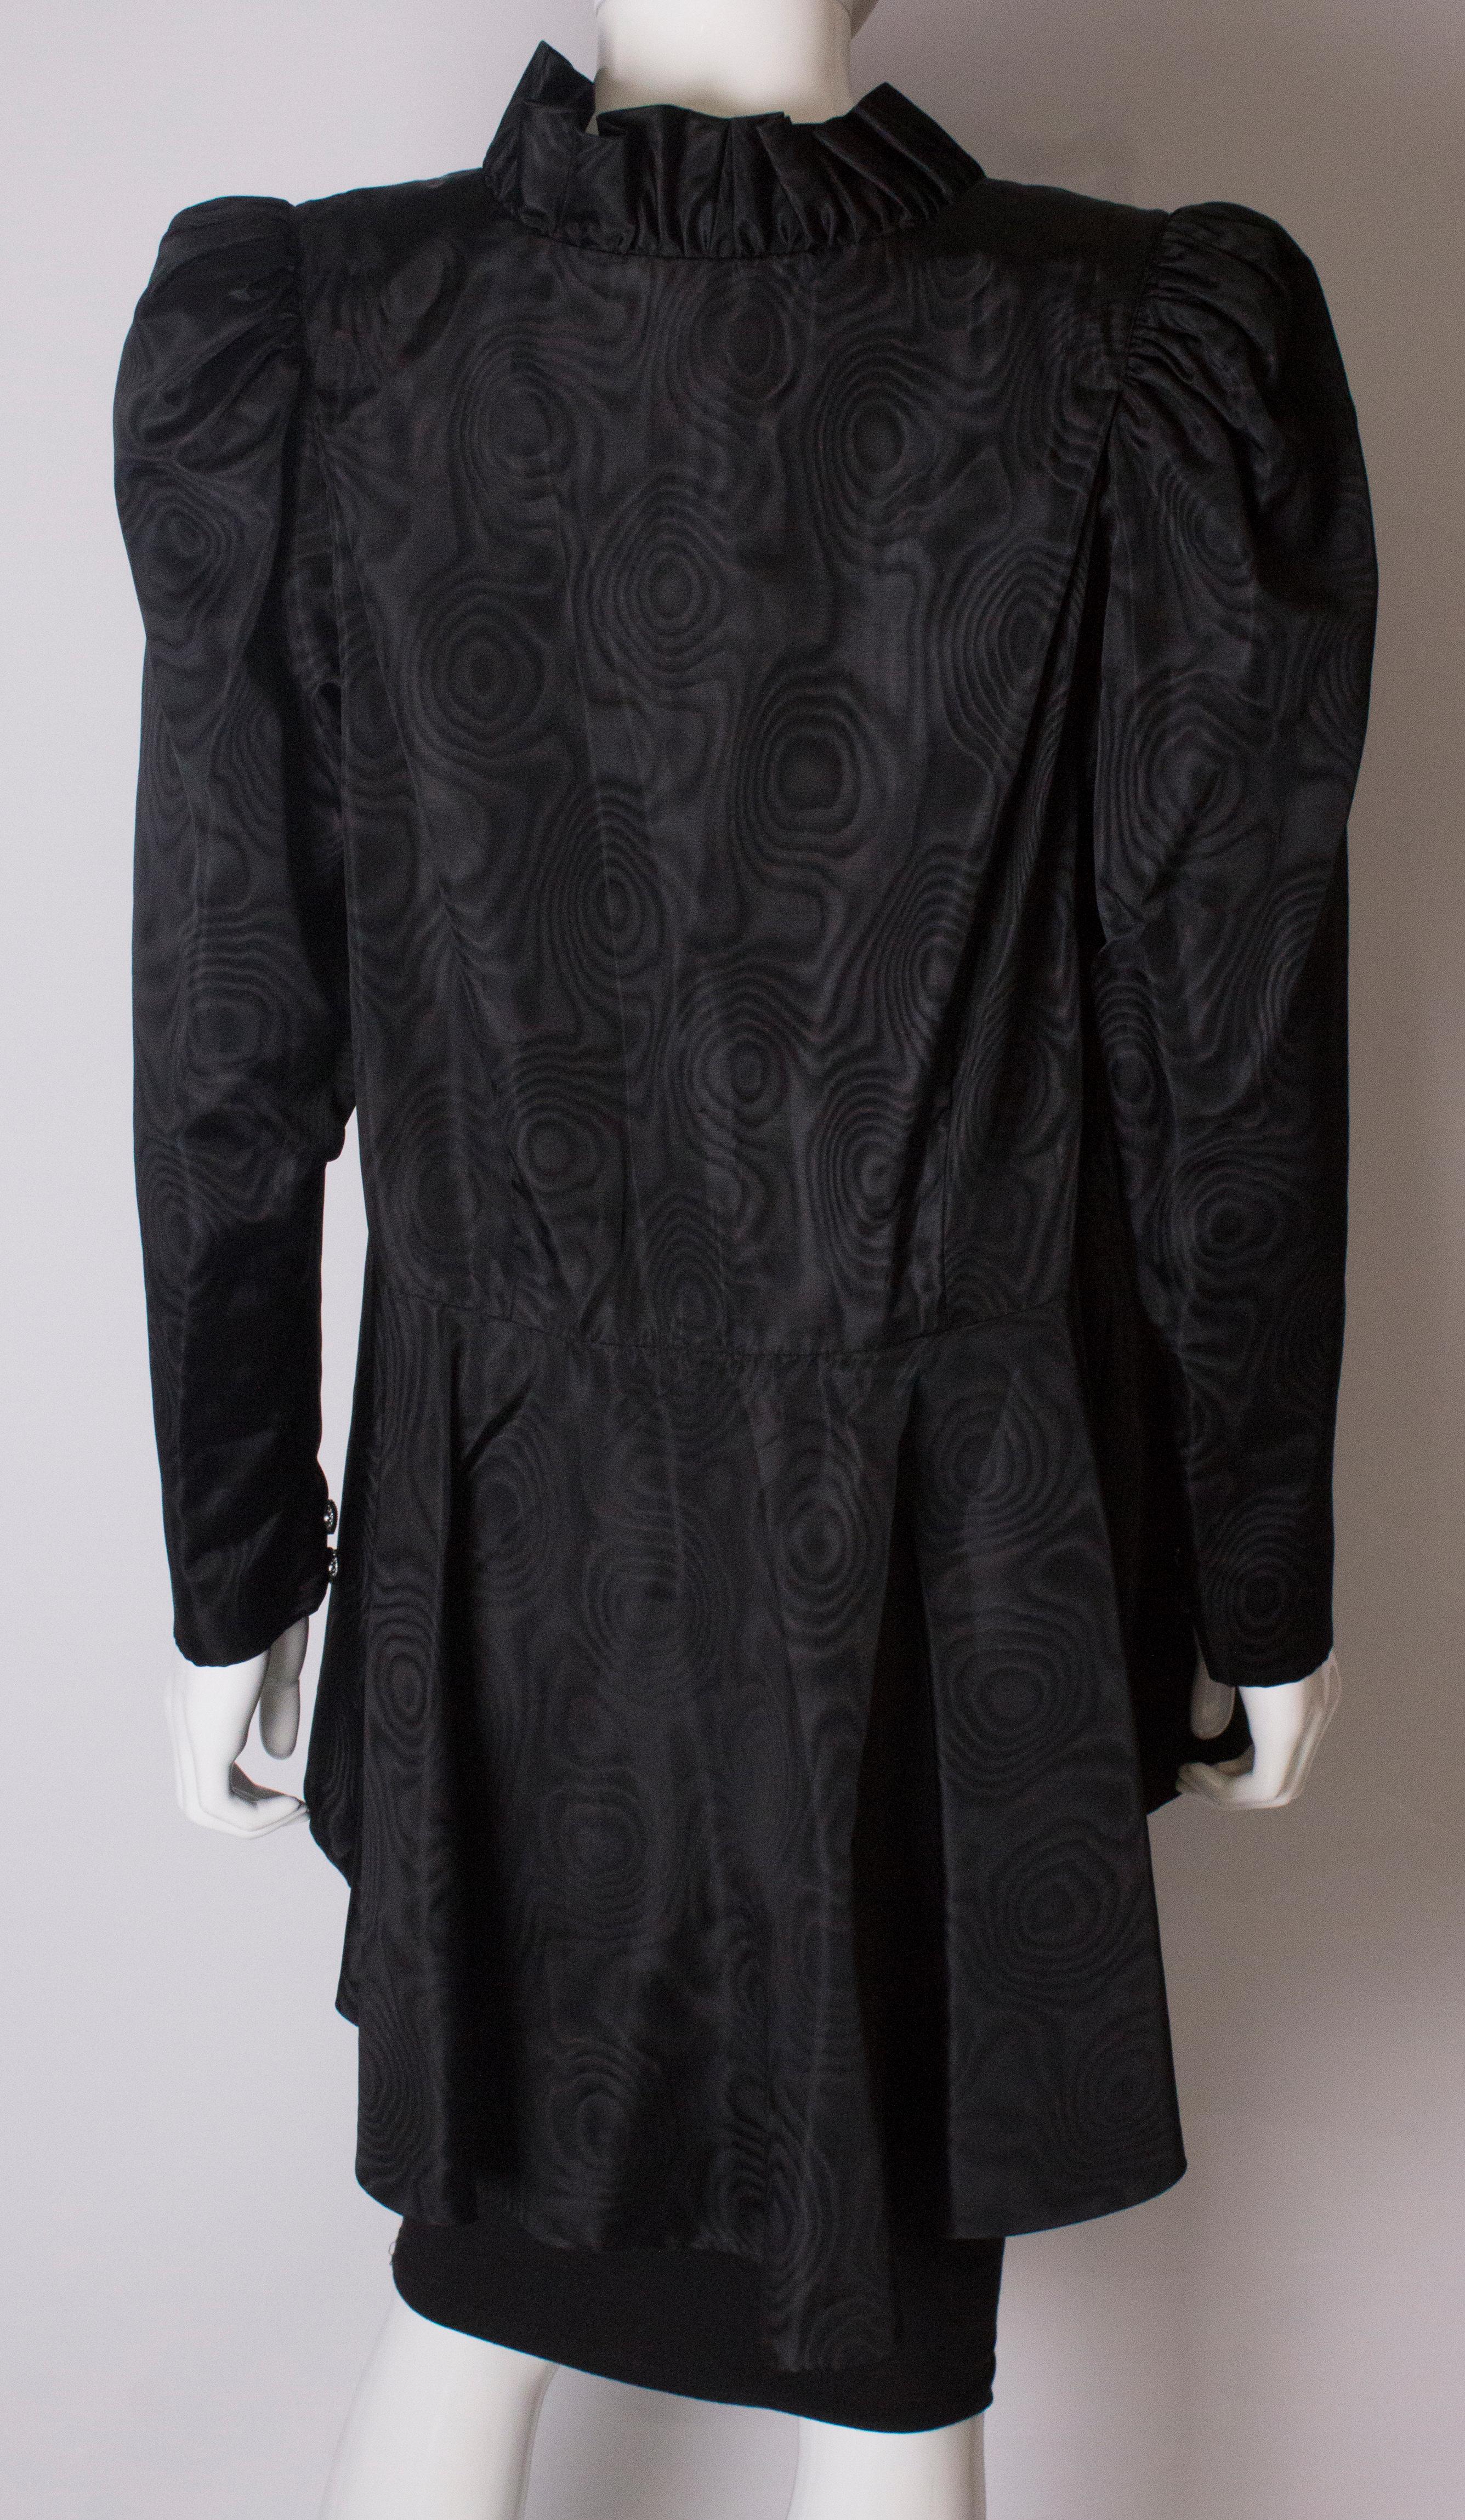 Black Moire Silk Vintage Jacket with Frill Edged Collar and Peplum For Sale 3